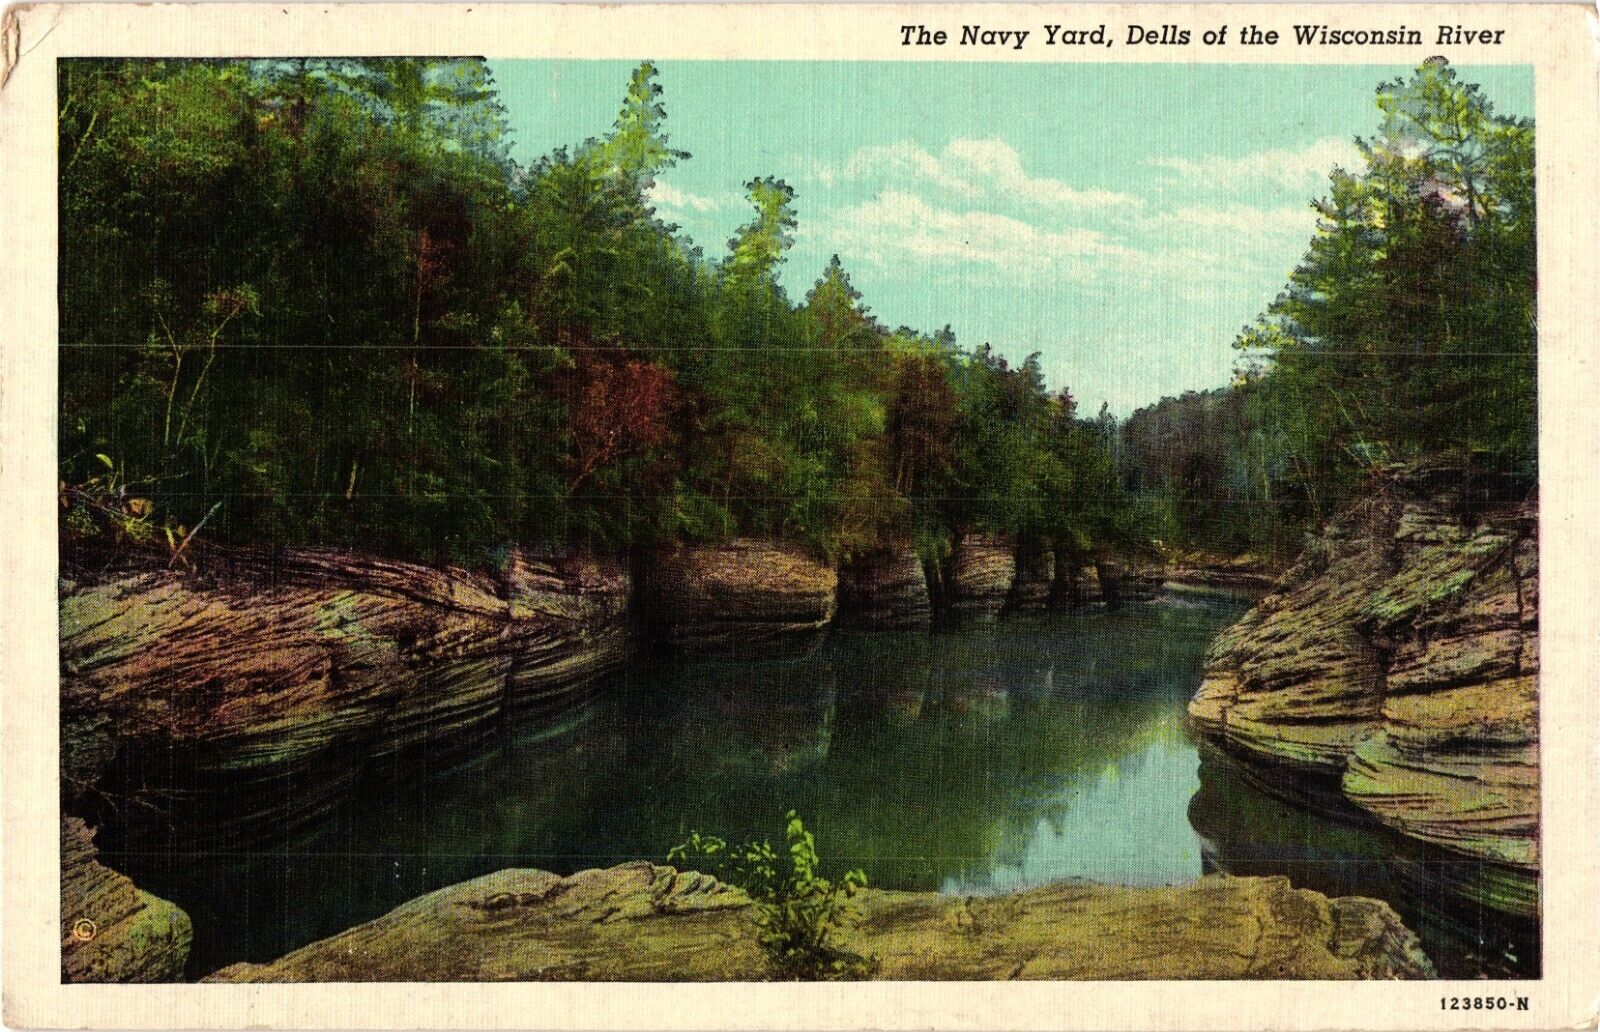 1952 The Navy Yard Dells Rock Formations of Wisconsin River Postcard